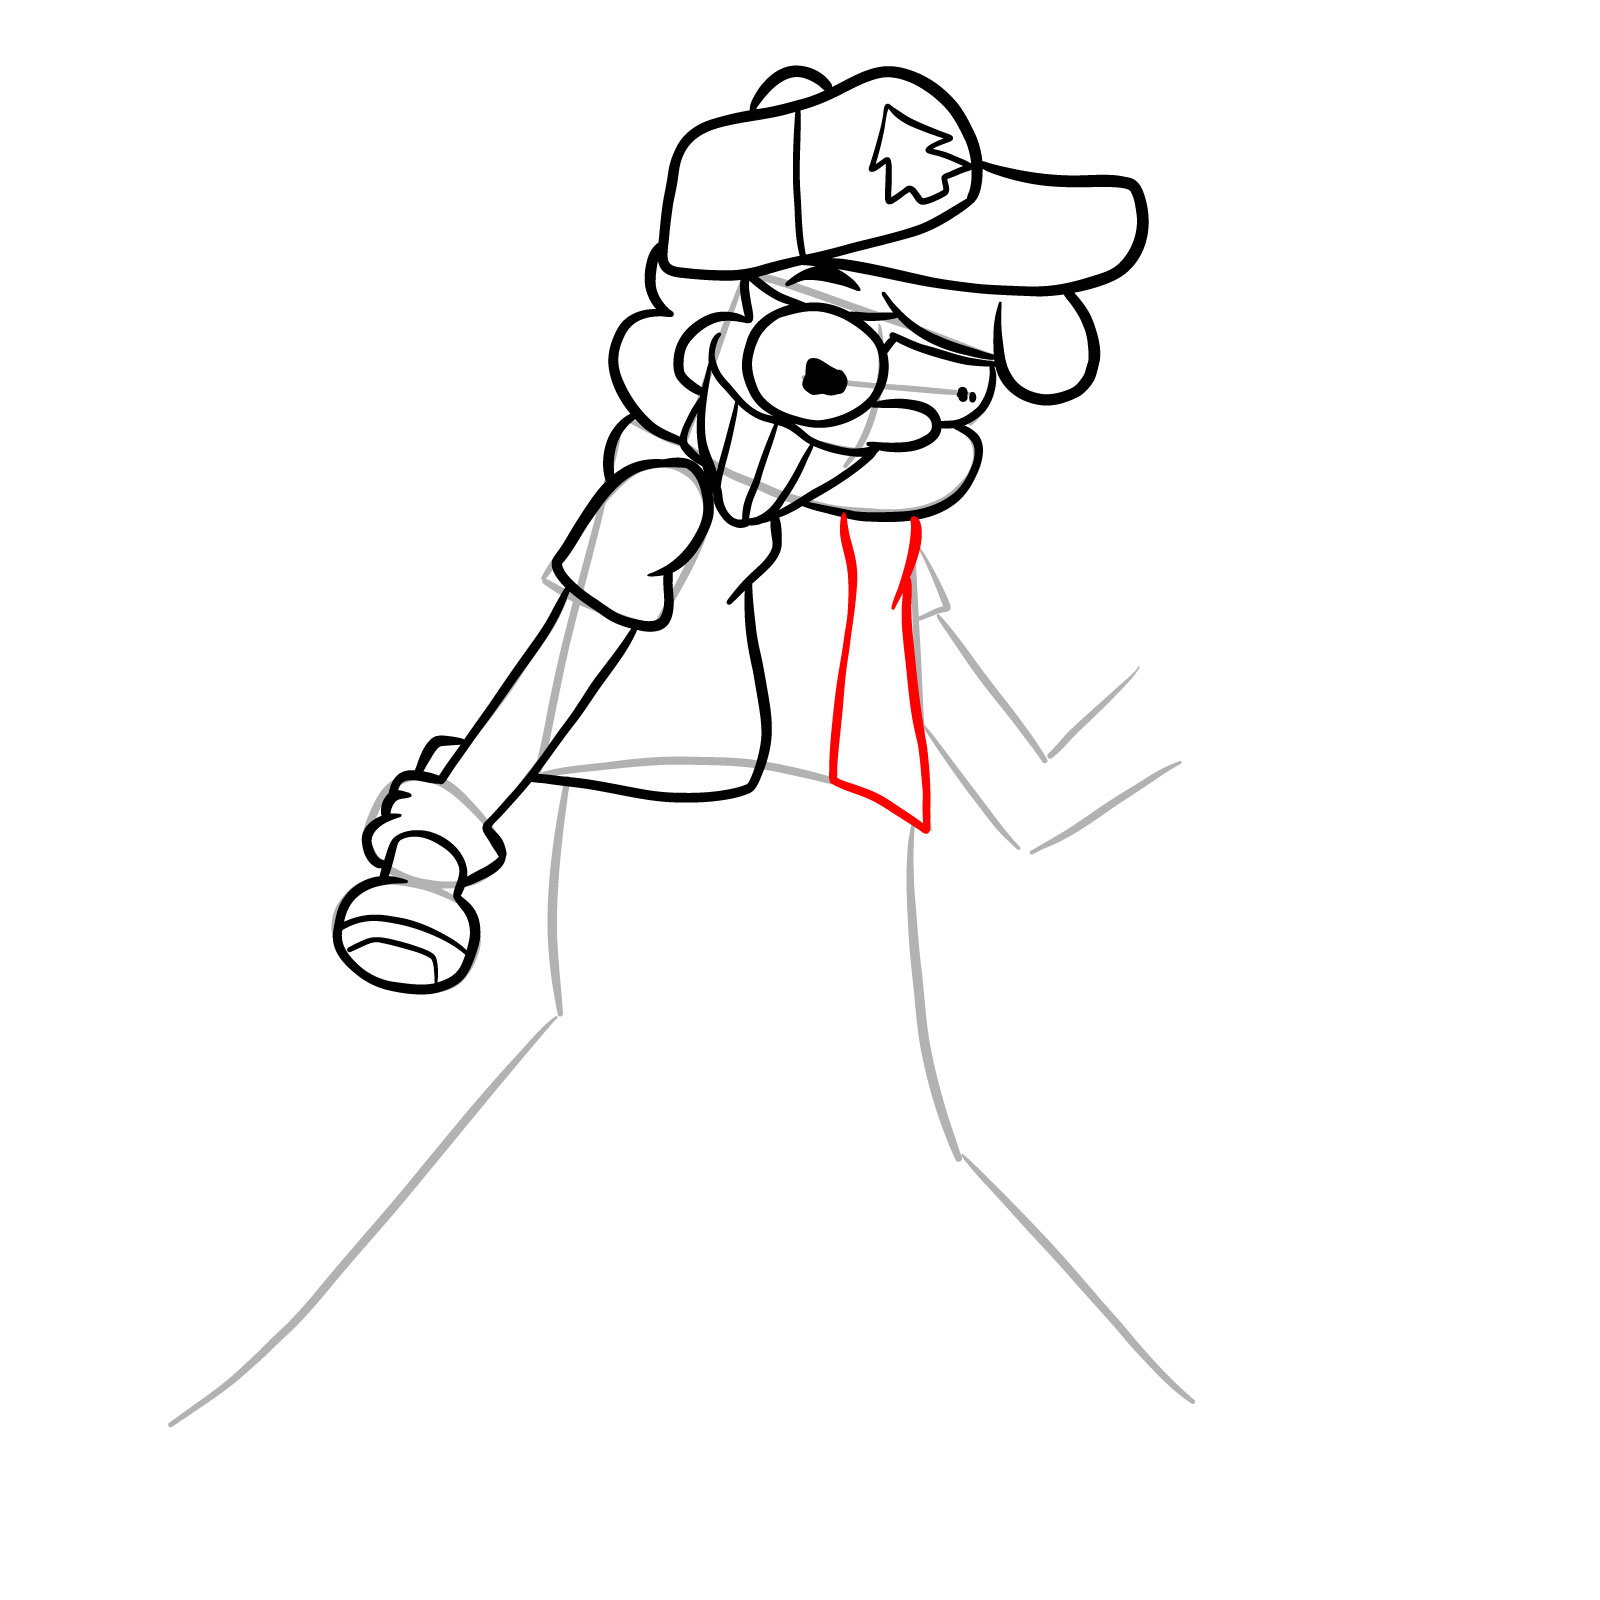 How to draw Mason Dipper Pines Glitched legends - step 20